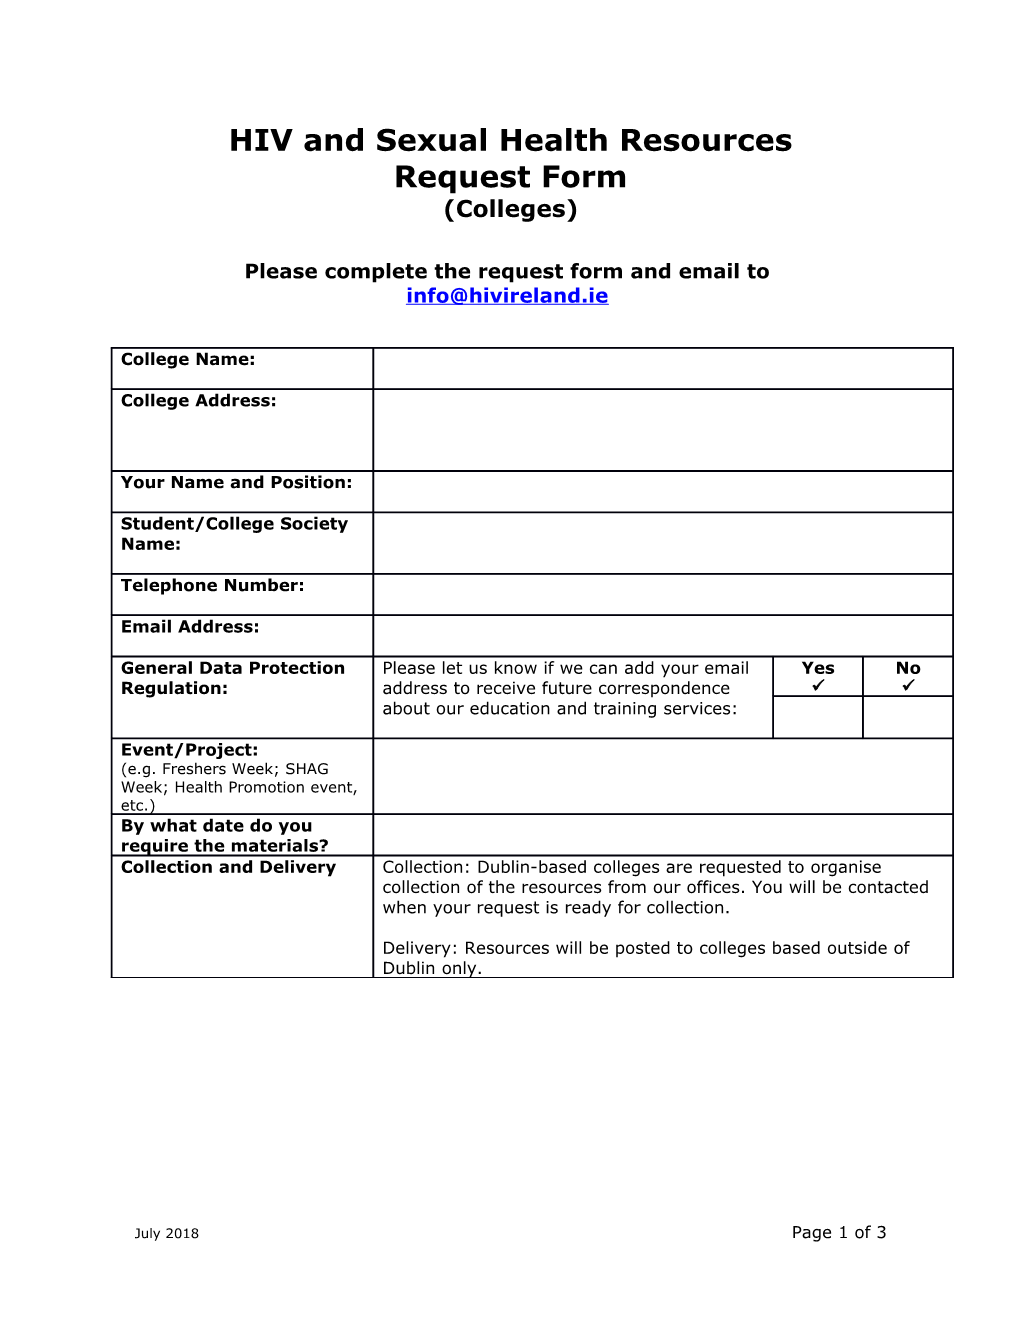 Please Complete the Request Form and Email To